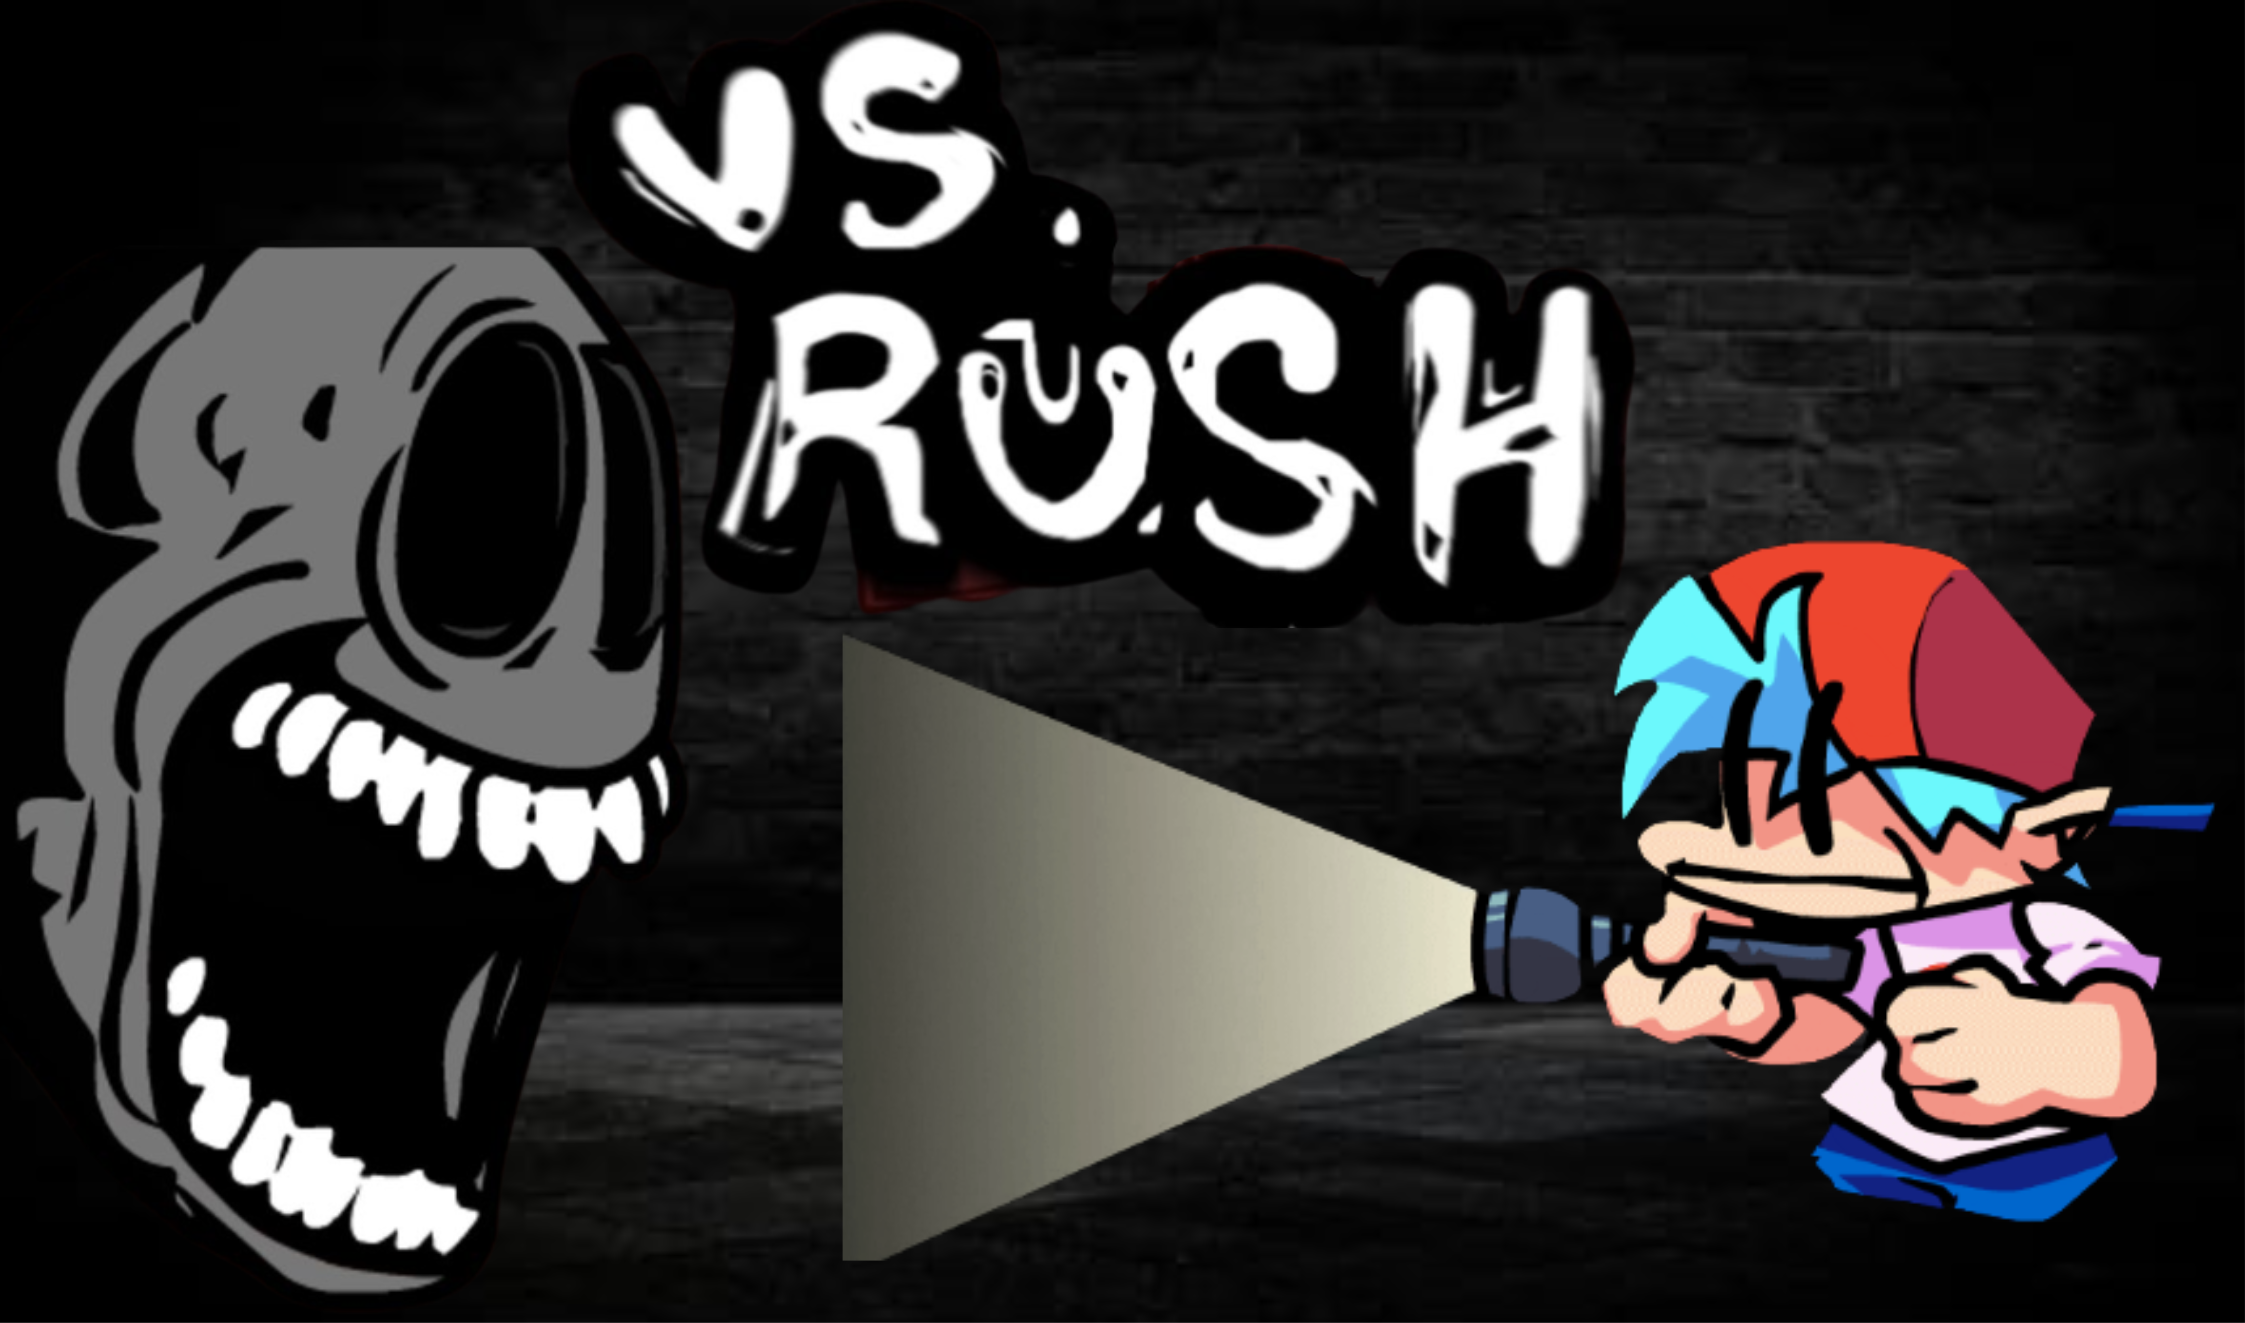 FNF Doors vs Rush Mod APK for Android Download